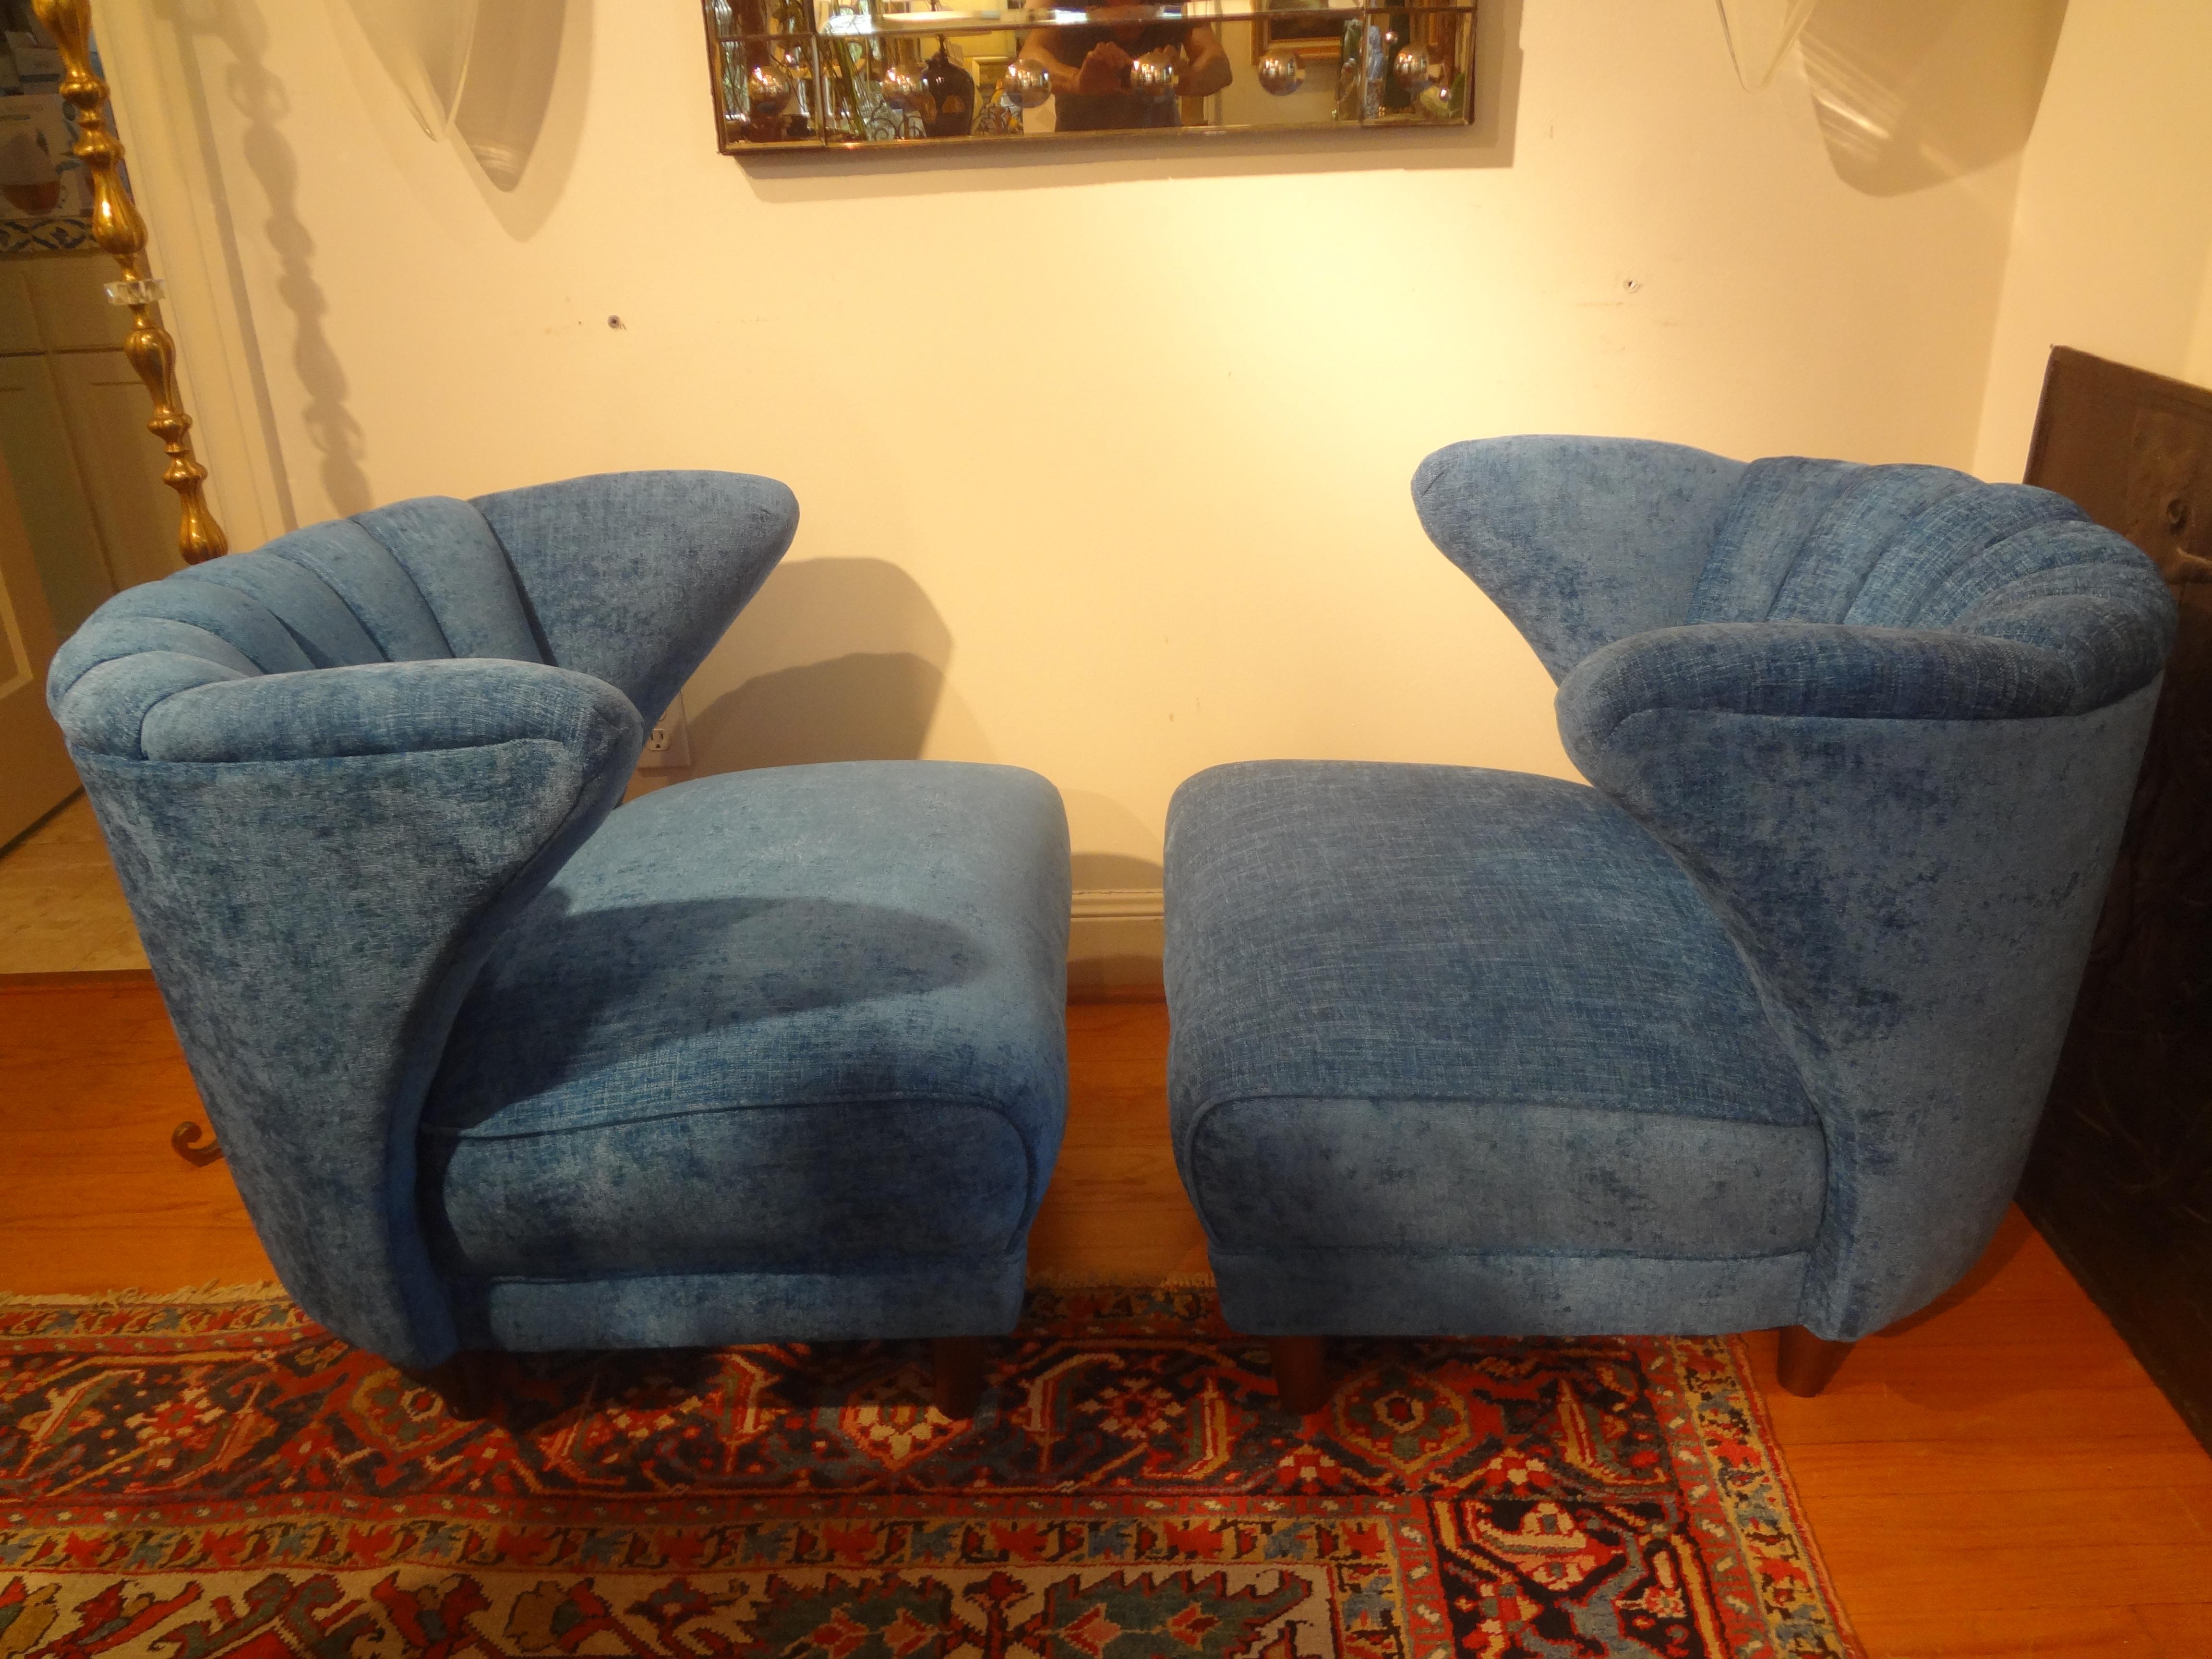 Pair Of Mid Century Modern Lounge Chairs By Karpen Of California.
This sculptural pair of mid-century modern lounge chairs have been recently upholstered in a beautiful shade of blue chenille.
This gorgeous design lends itself for these to be